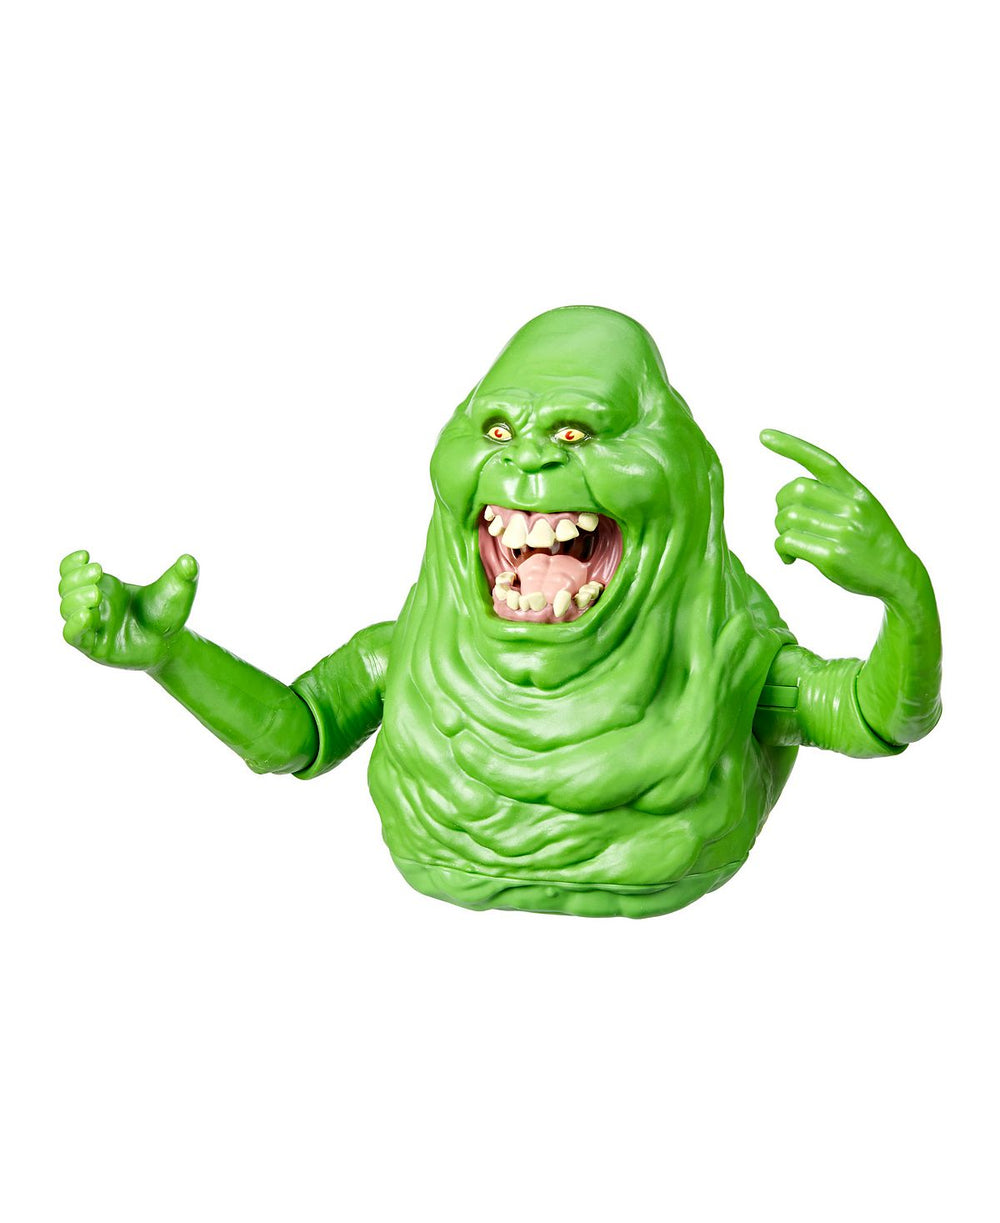 Hasbro Ghostbusters 7" Squash & Squeeze Slimer Action Figure